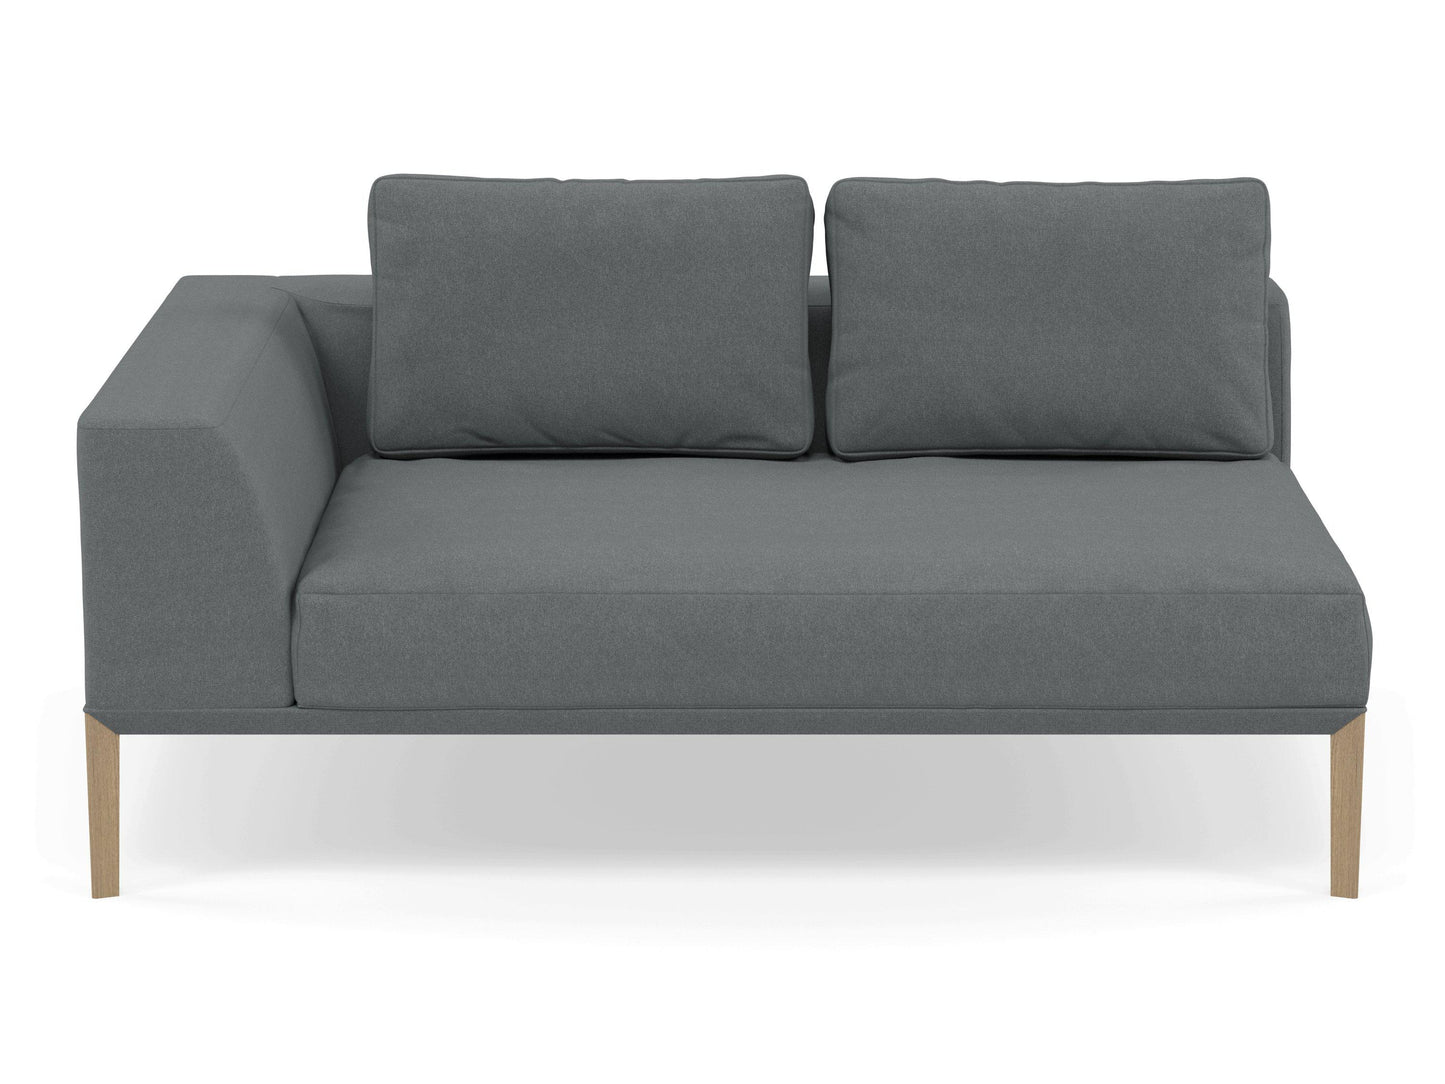 Modern 2 Seater Chaise Lounge Style Sofa with Right Armrest in Sea Spray Blue Fabric-Natural Oak-Distinct Designs (London) Ltd